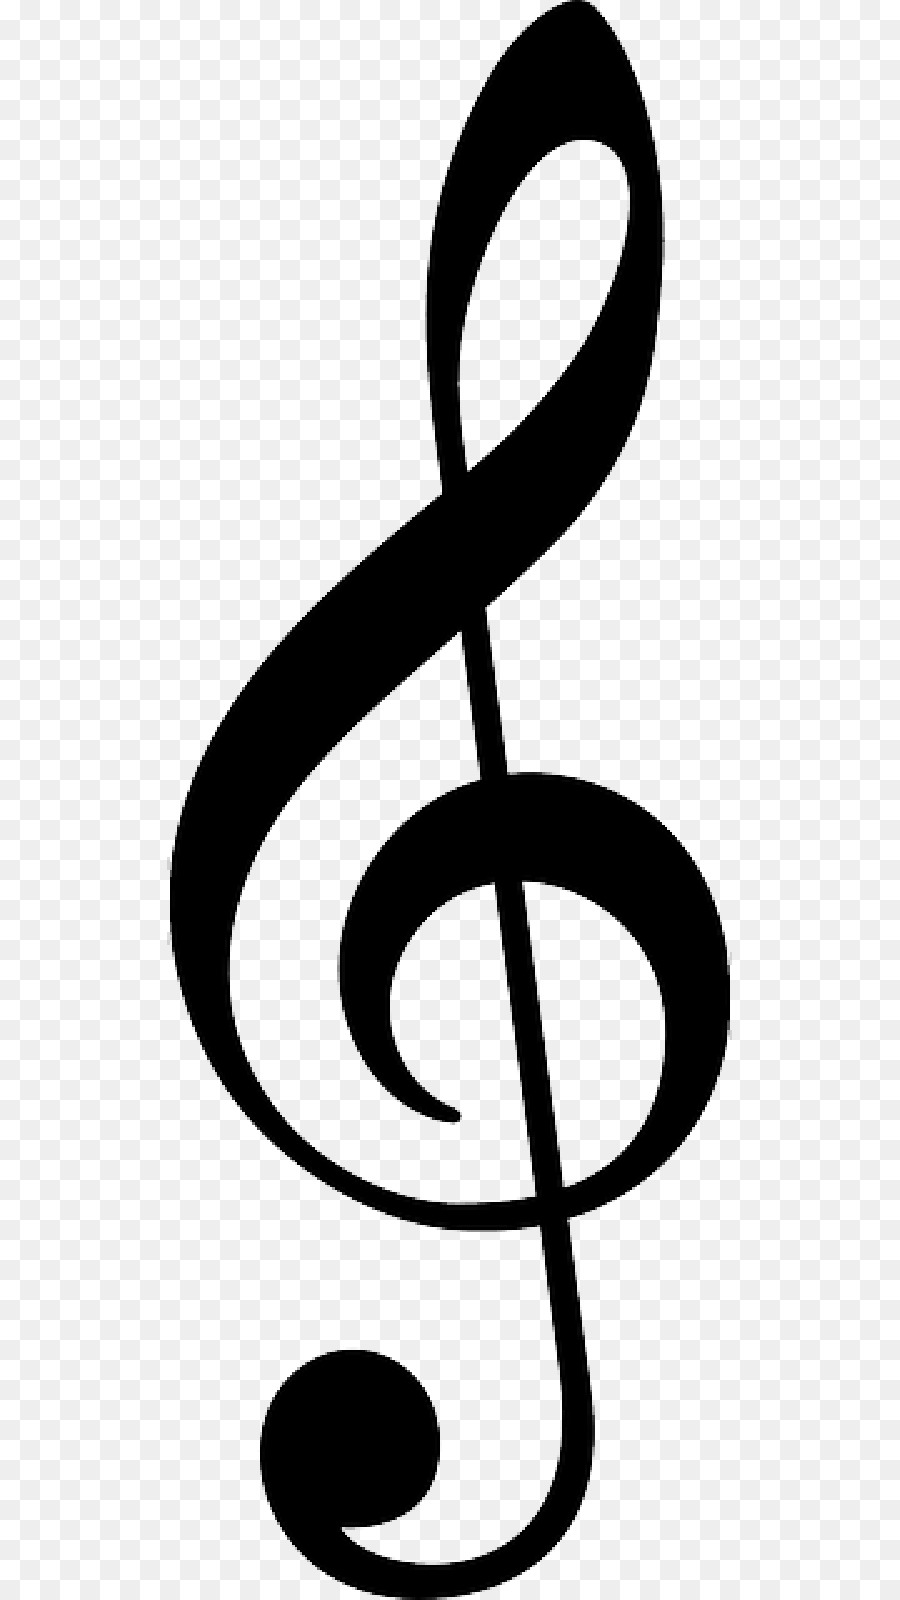 Clef Vector graphics Treble Music Staff - treble clef png download - 800*1600 - Free Transparent Clef png Download.